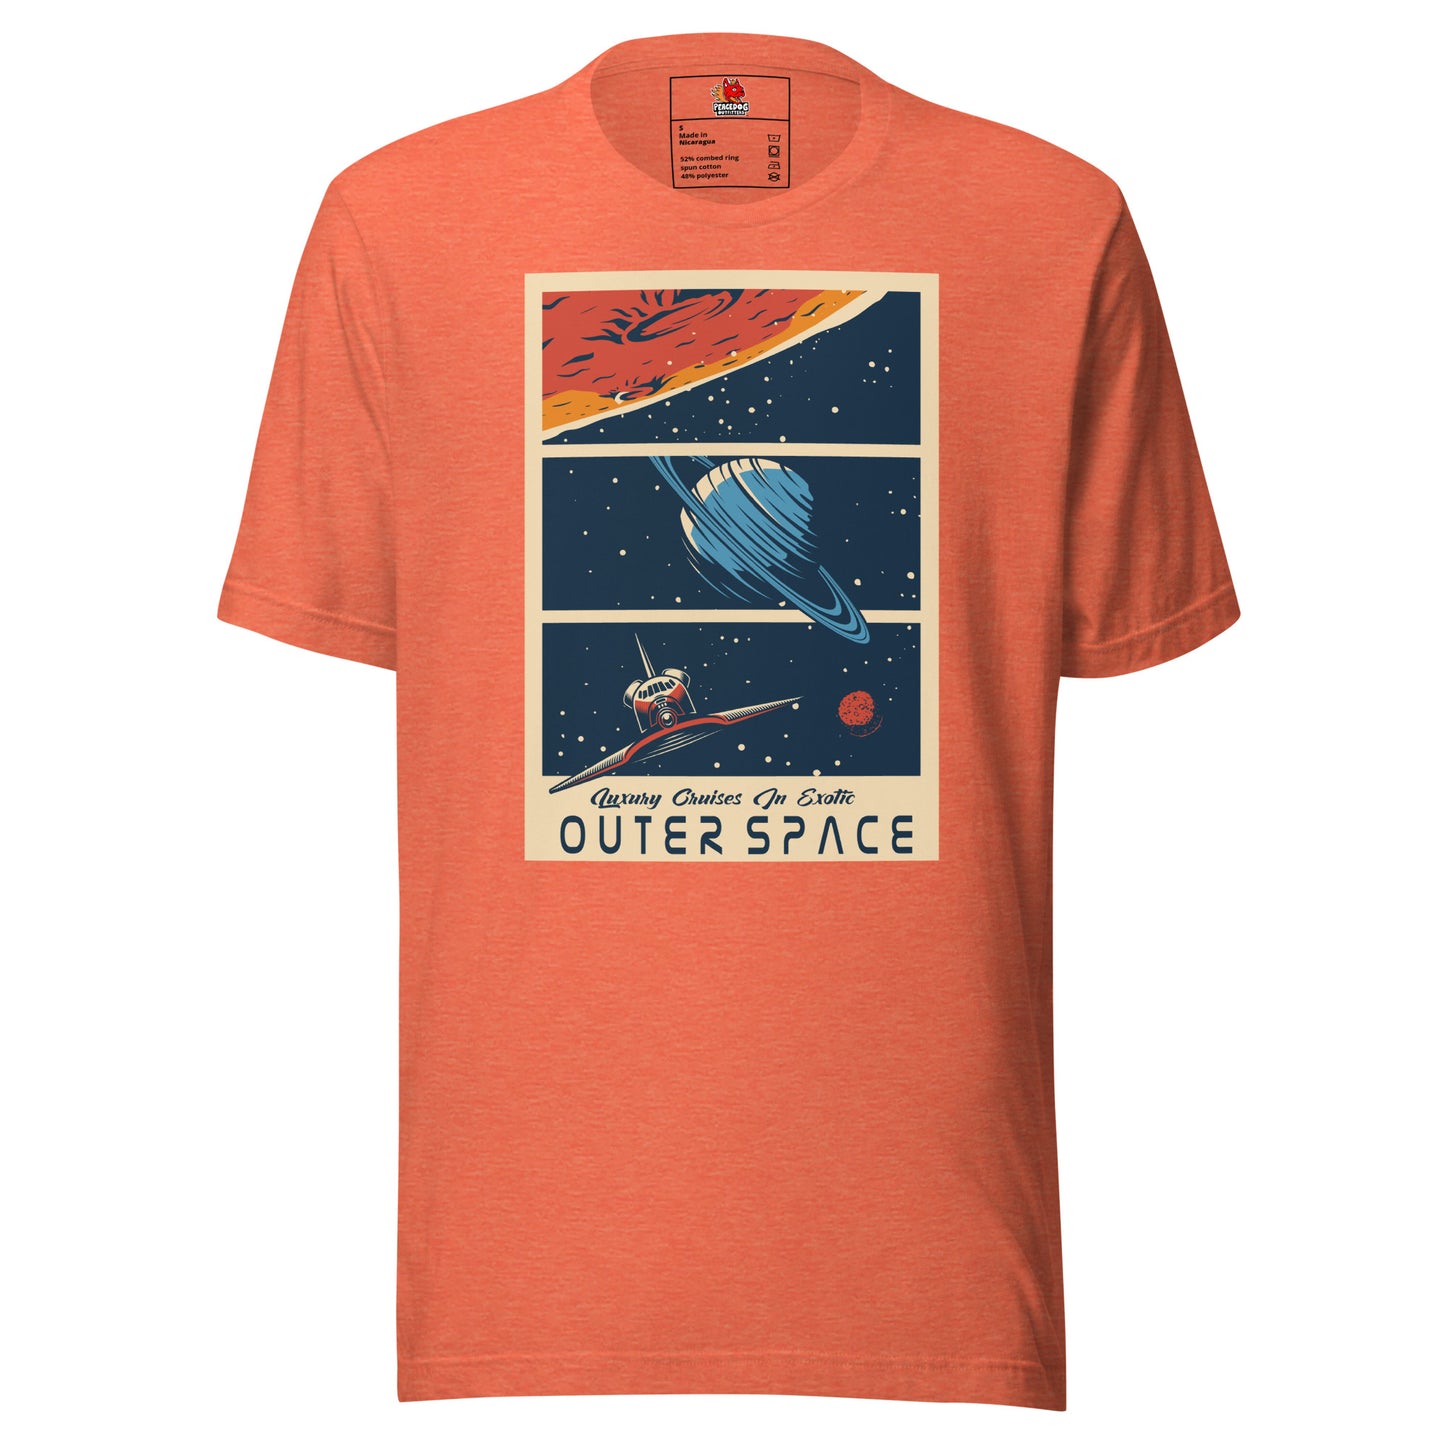 Outer Space T-shirt